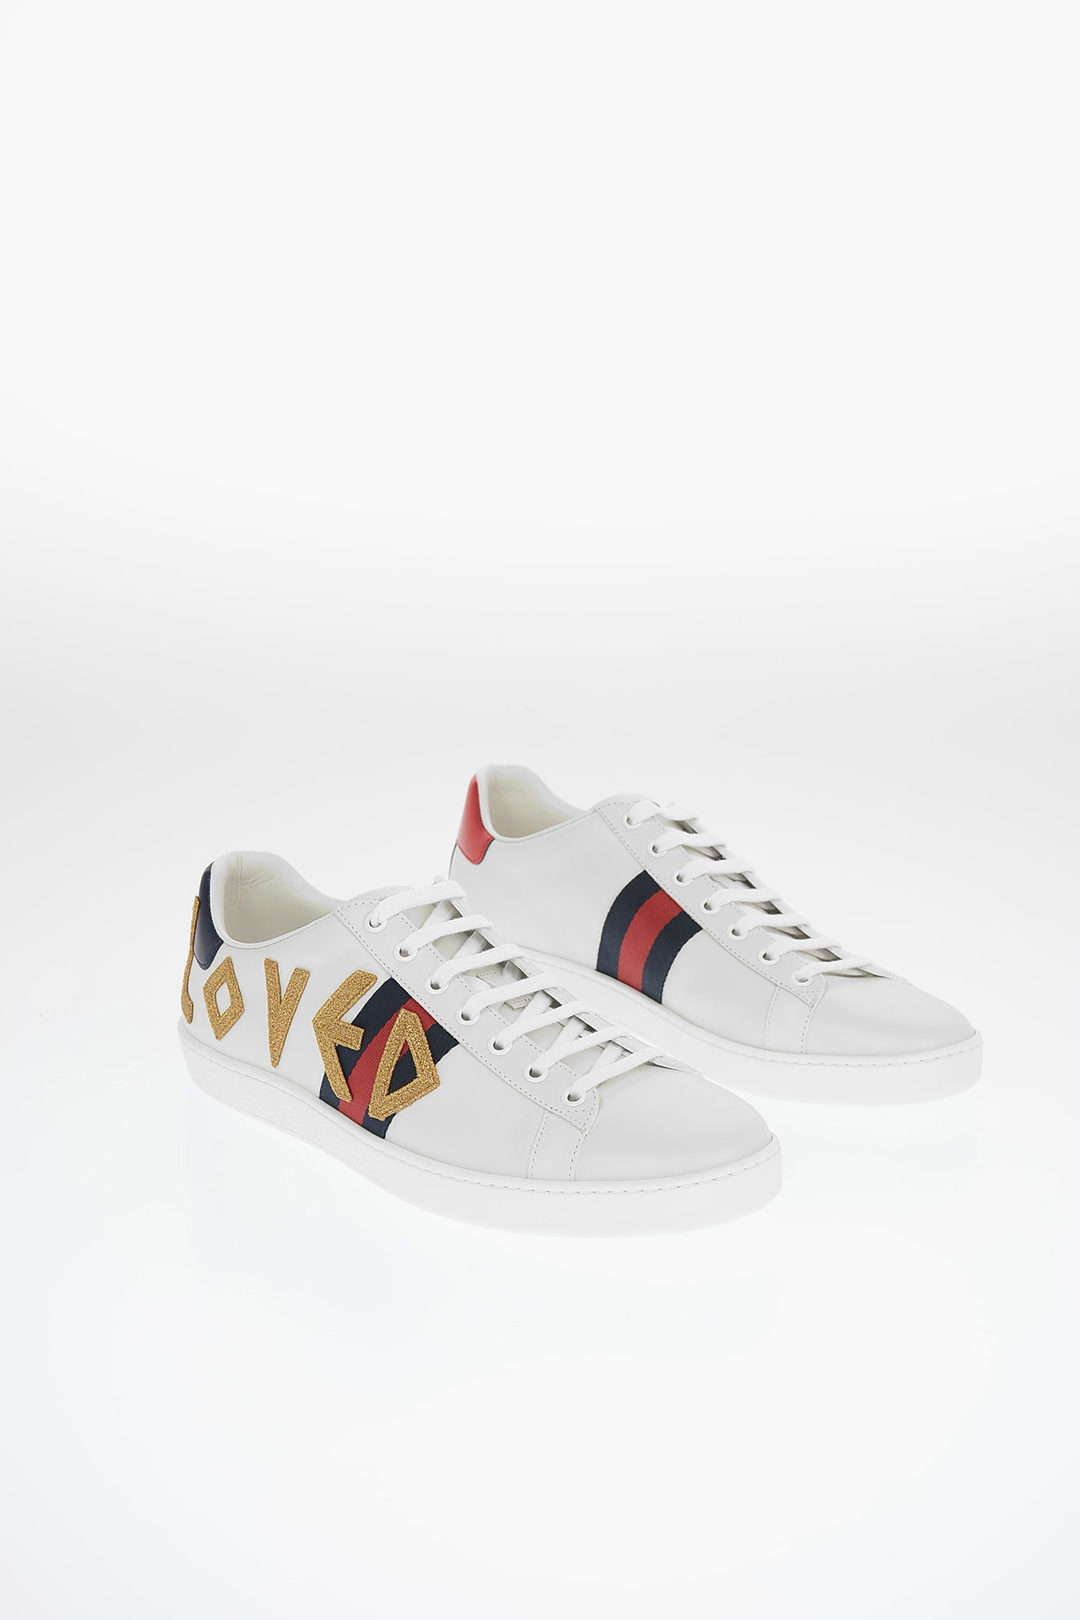 Gucci Leather Embroidered LOVED Sneakers women - Glamood Outlet